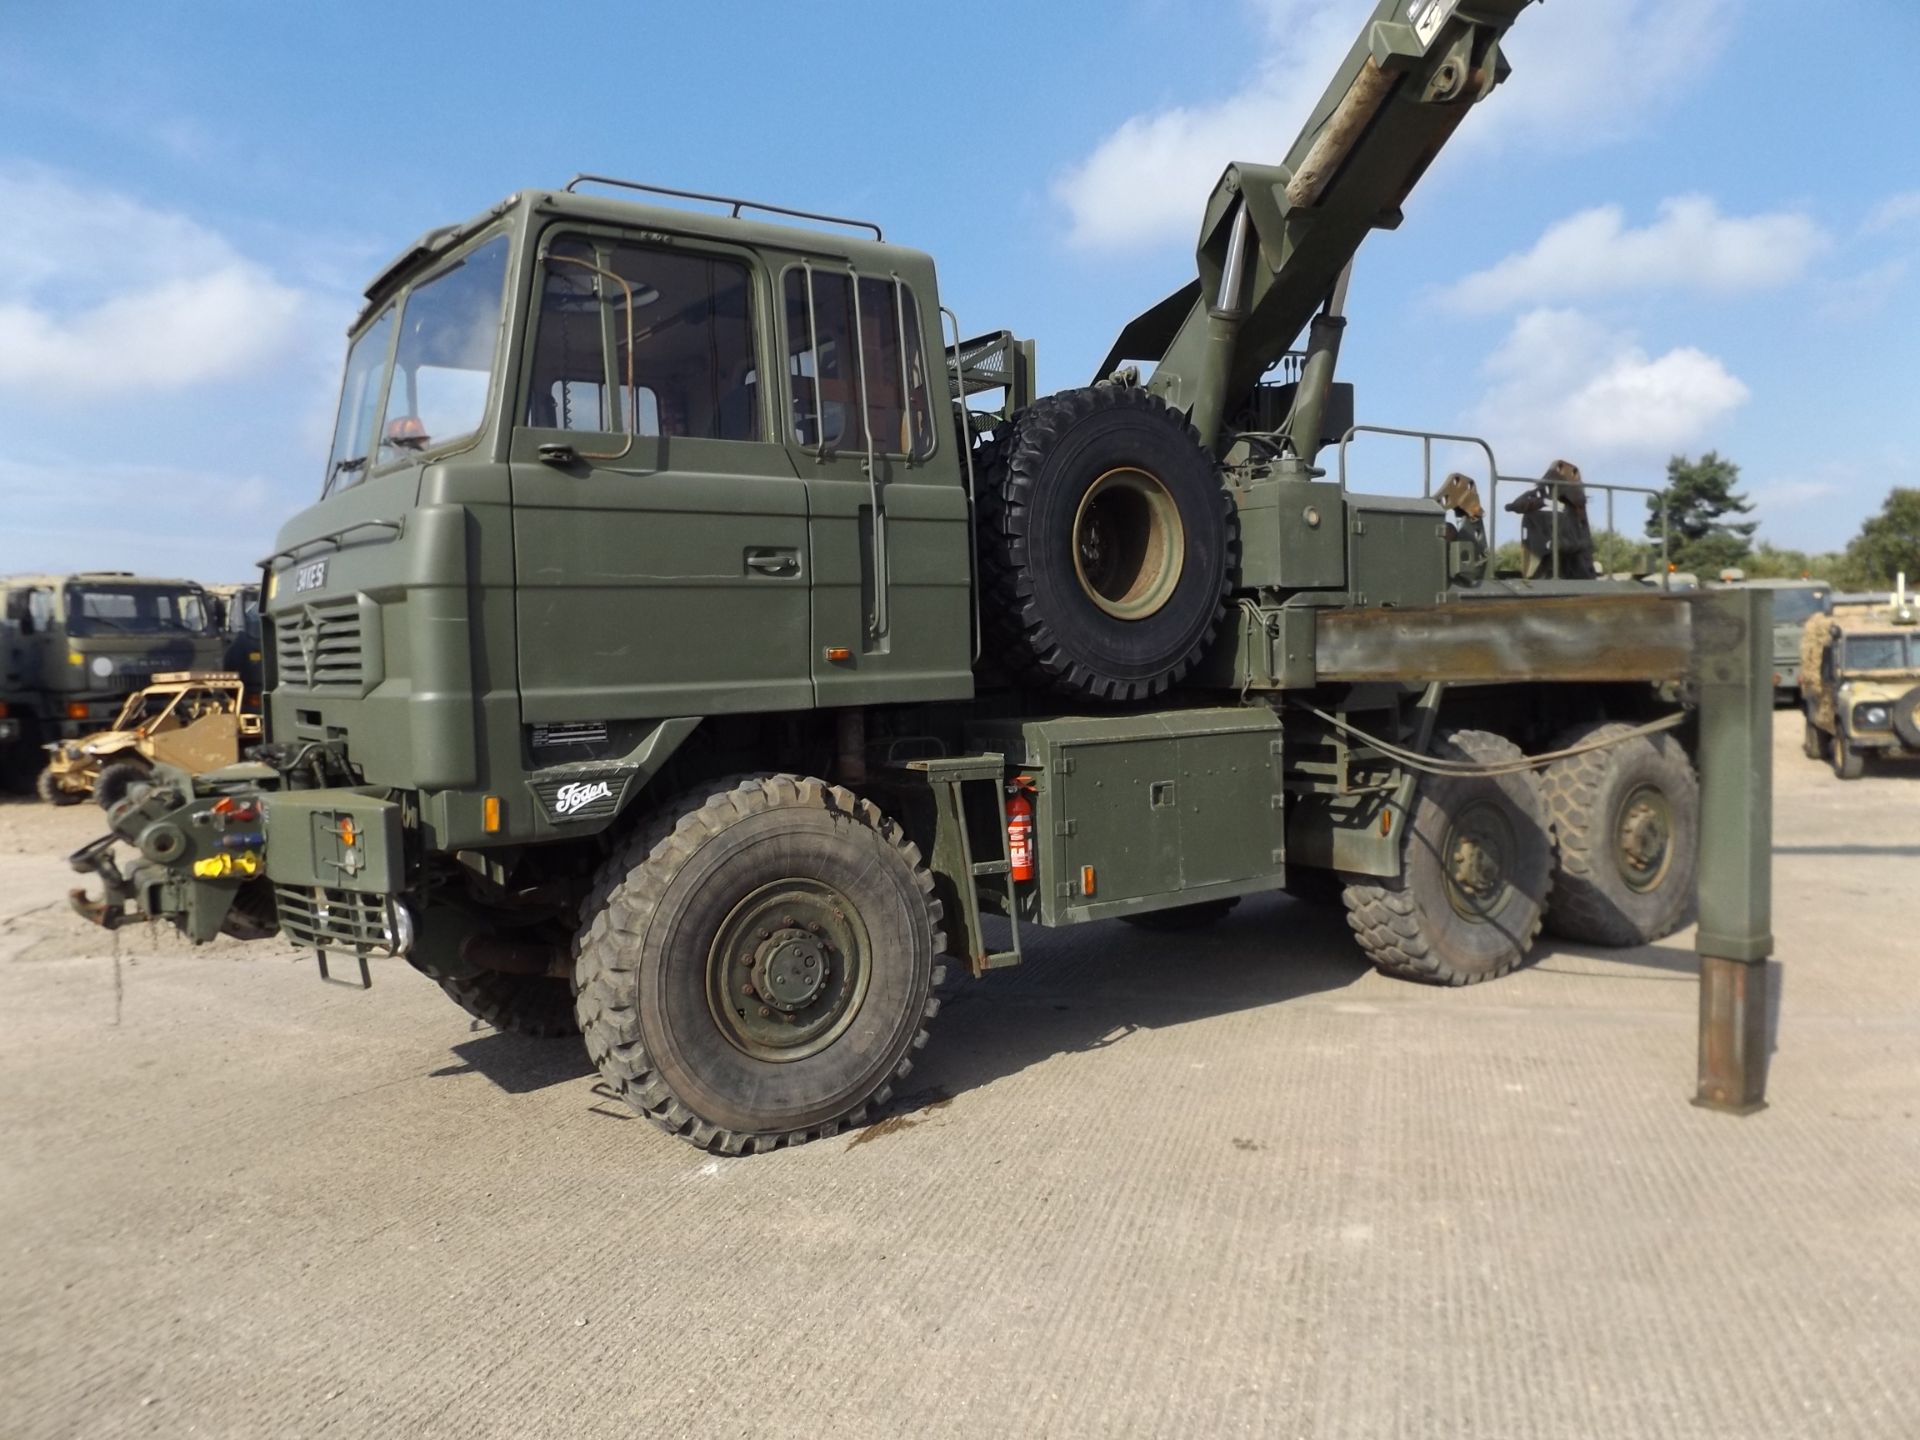 Foden 6x6 Recovery Vehicle which is Complete with Remotes and EKA Recovery Tools - Image 2 of 27